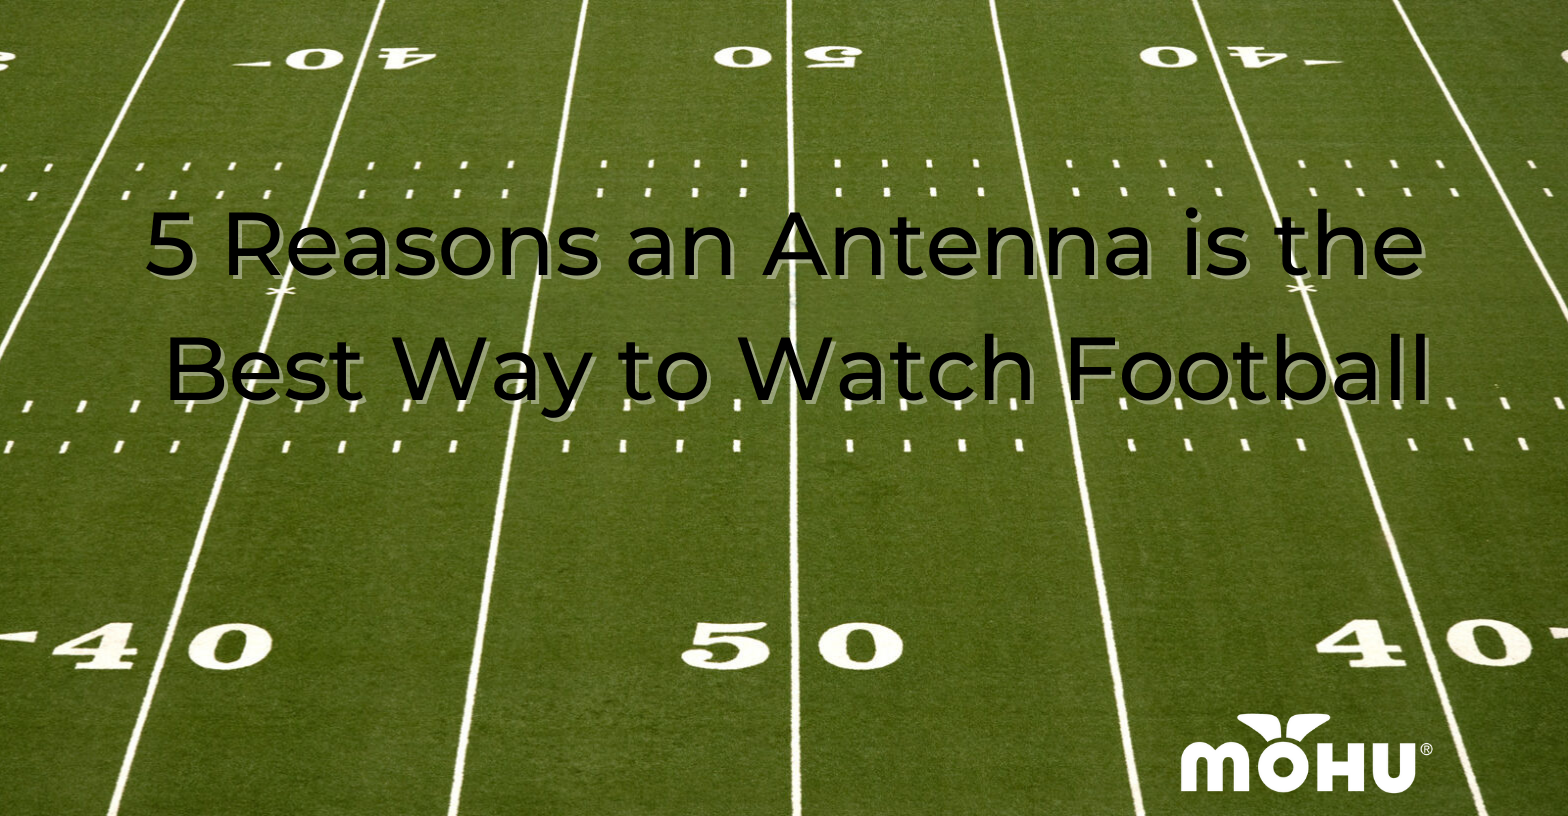 Football field with 5 Reasons an Antenna is the Best Way to Watch Football and Mohu logo